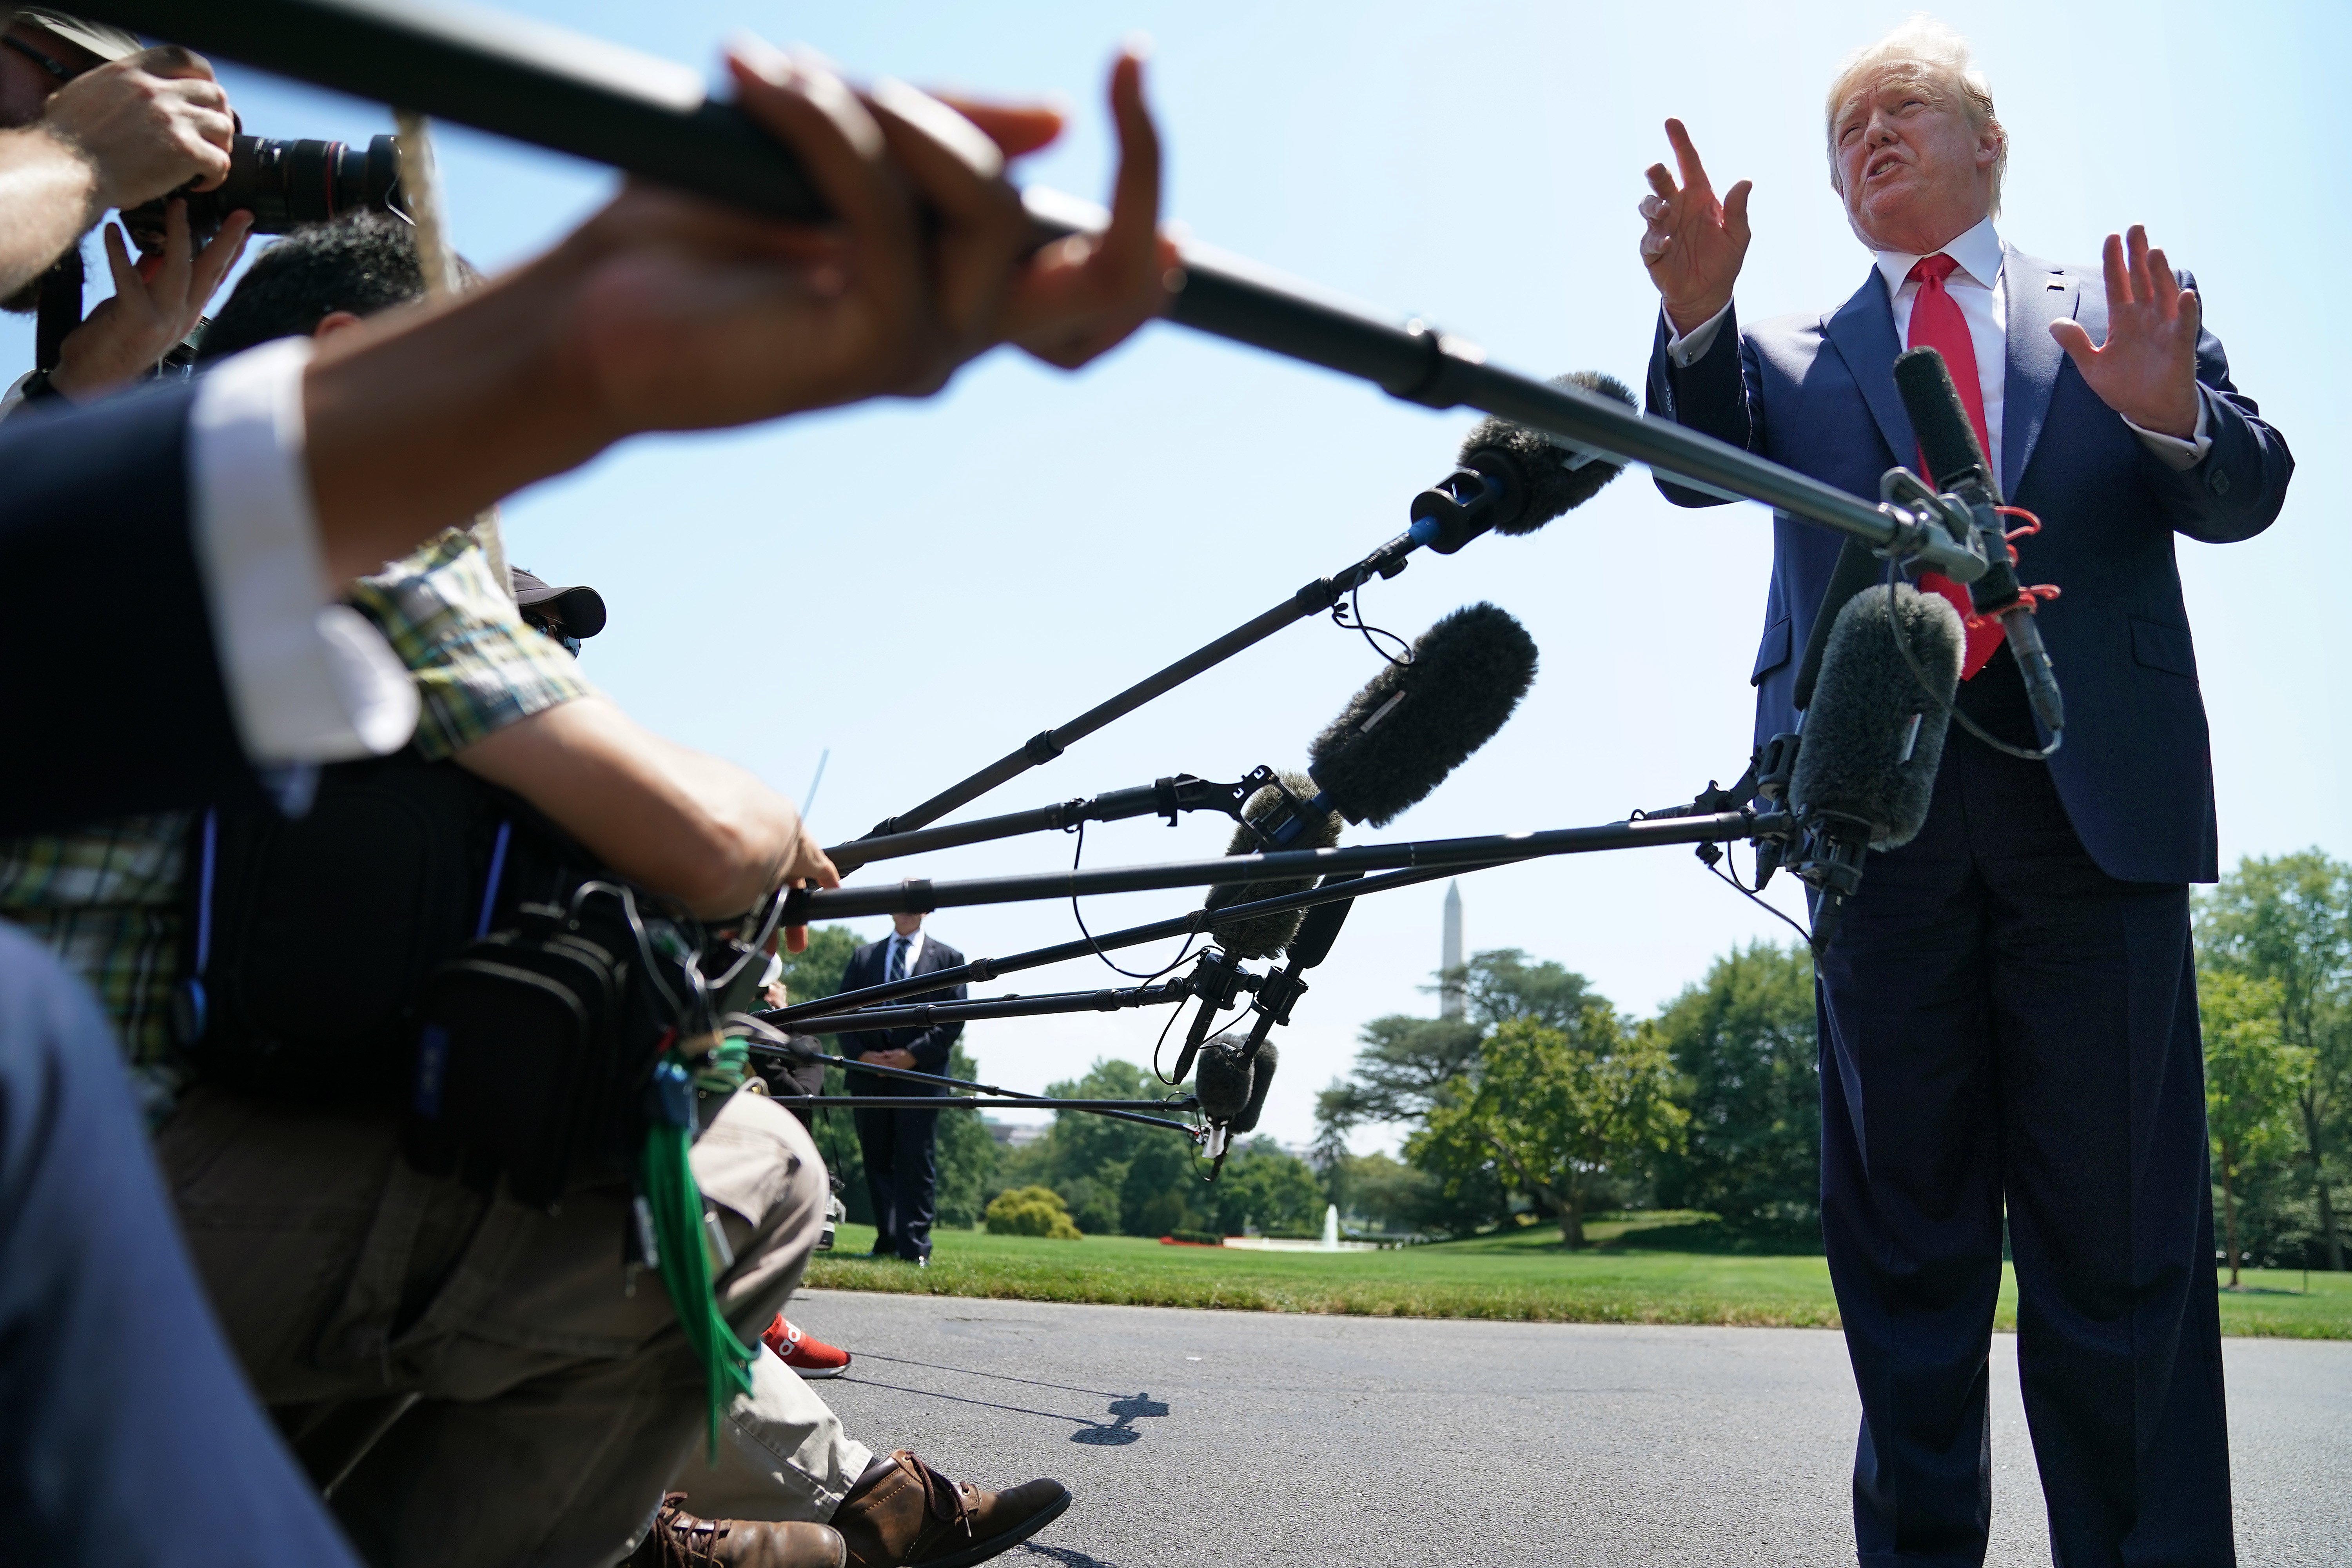 WASHINGTON, DC - JULY 30: U.S. President Donald Trump talks to journalists after returning to the White House July 30, 2019 in Washington, DC. Trump traveled to Williamsburg, Virginia, to deliver remarks at the 400th Anniversary of the first representative legislative assembly at the historic Jamestown settlement. (Photo by Chip Somodevilla/Getty Images)